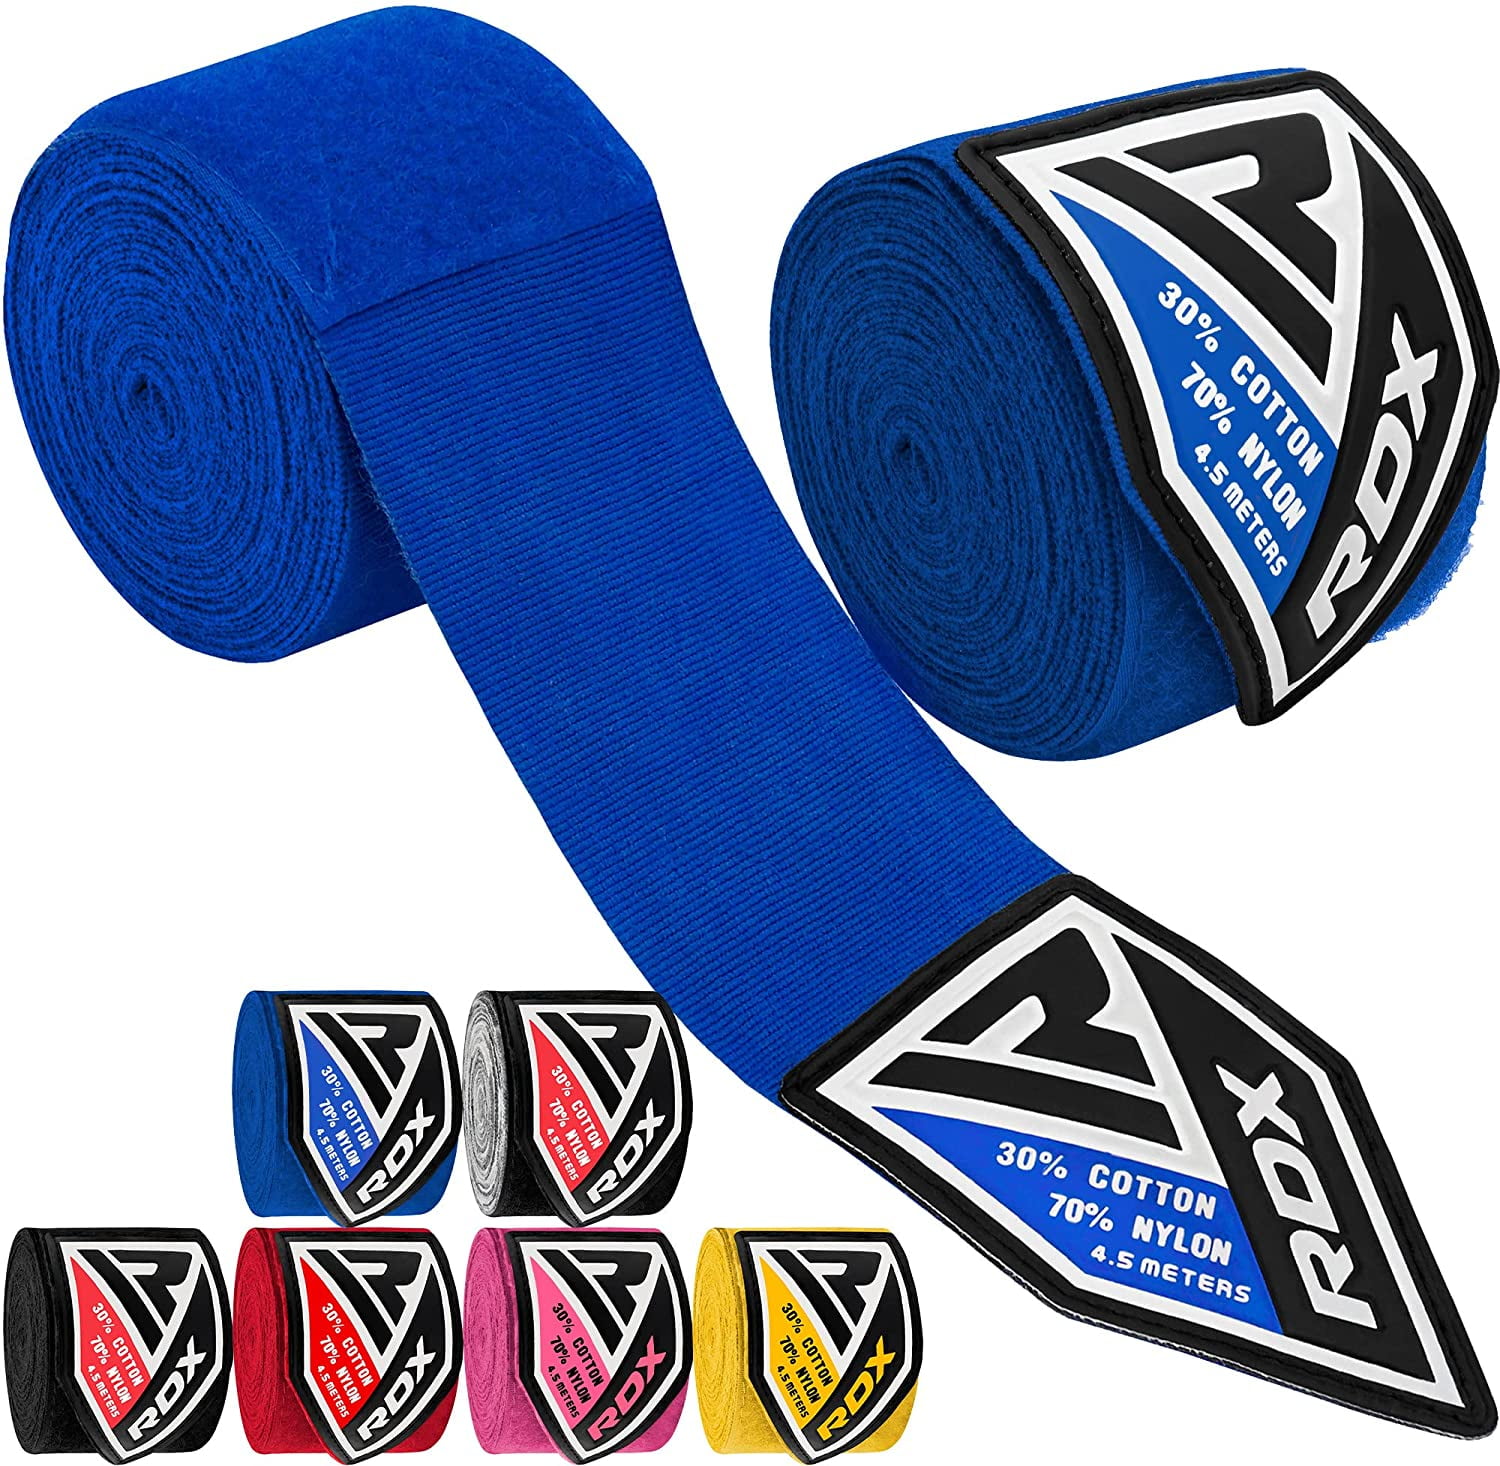 DEFY Professional 180 Inch Hand Wraps for Boxing Muay Thai MMA Elastic Bandages for Men & Women Pair 